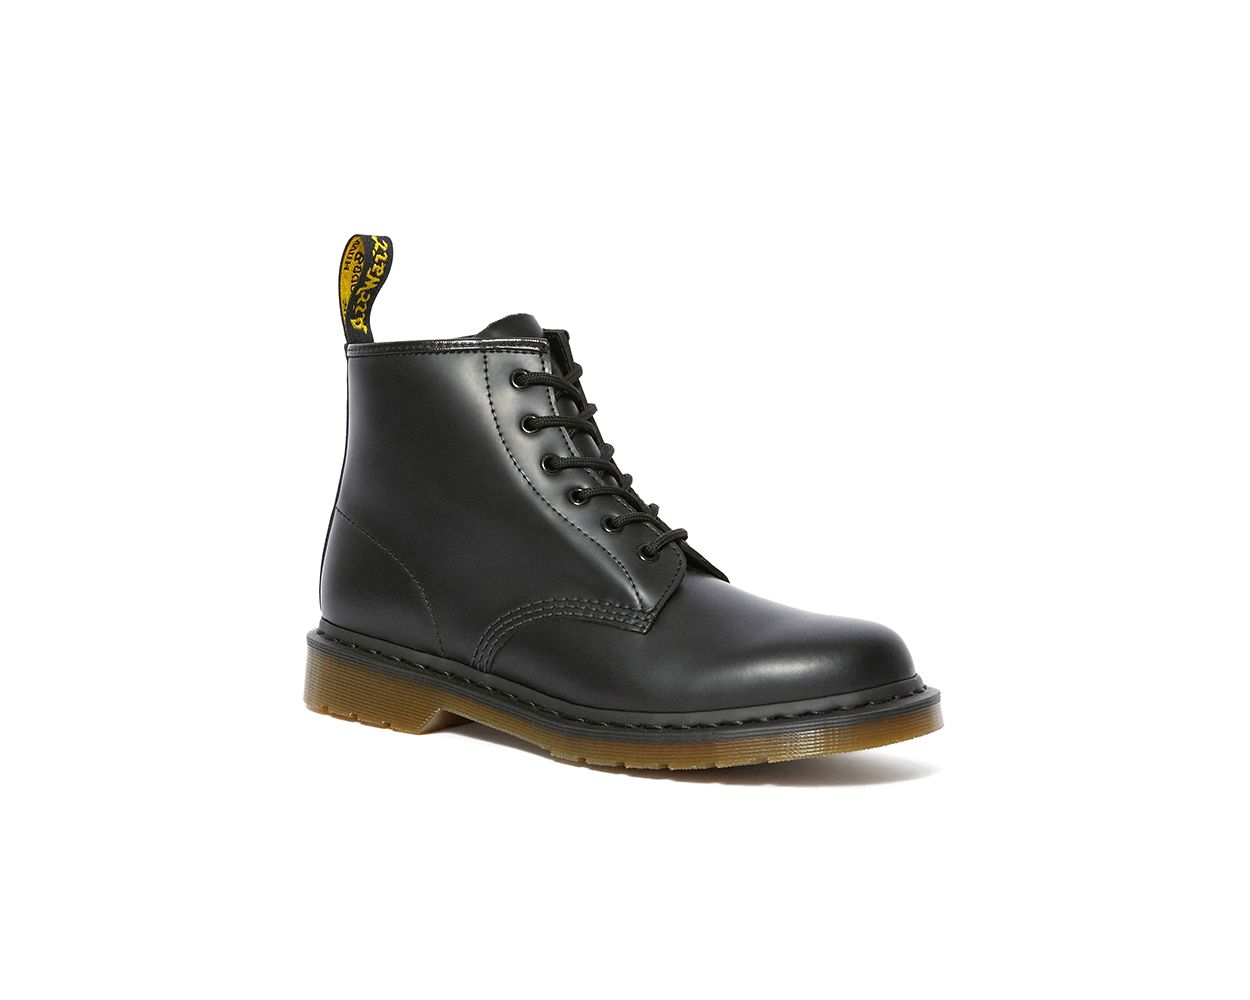 Dr. Martens 101 Smooth Leather Ankle Boots in Black Smooth Leather ...